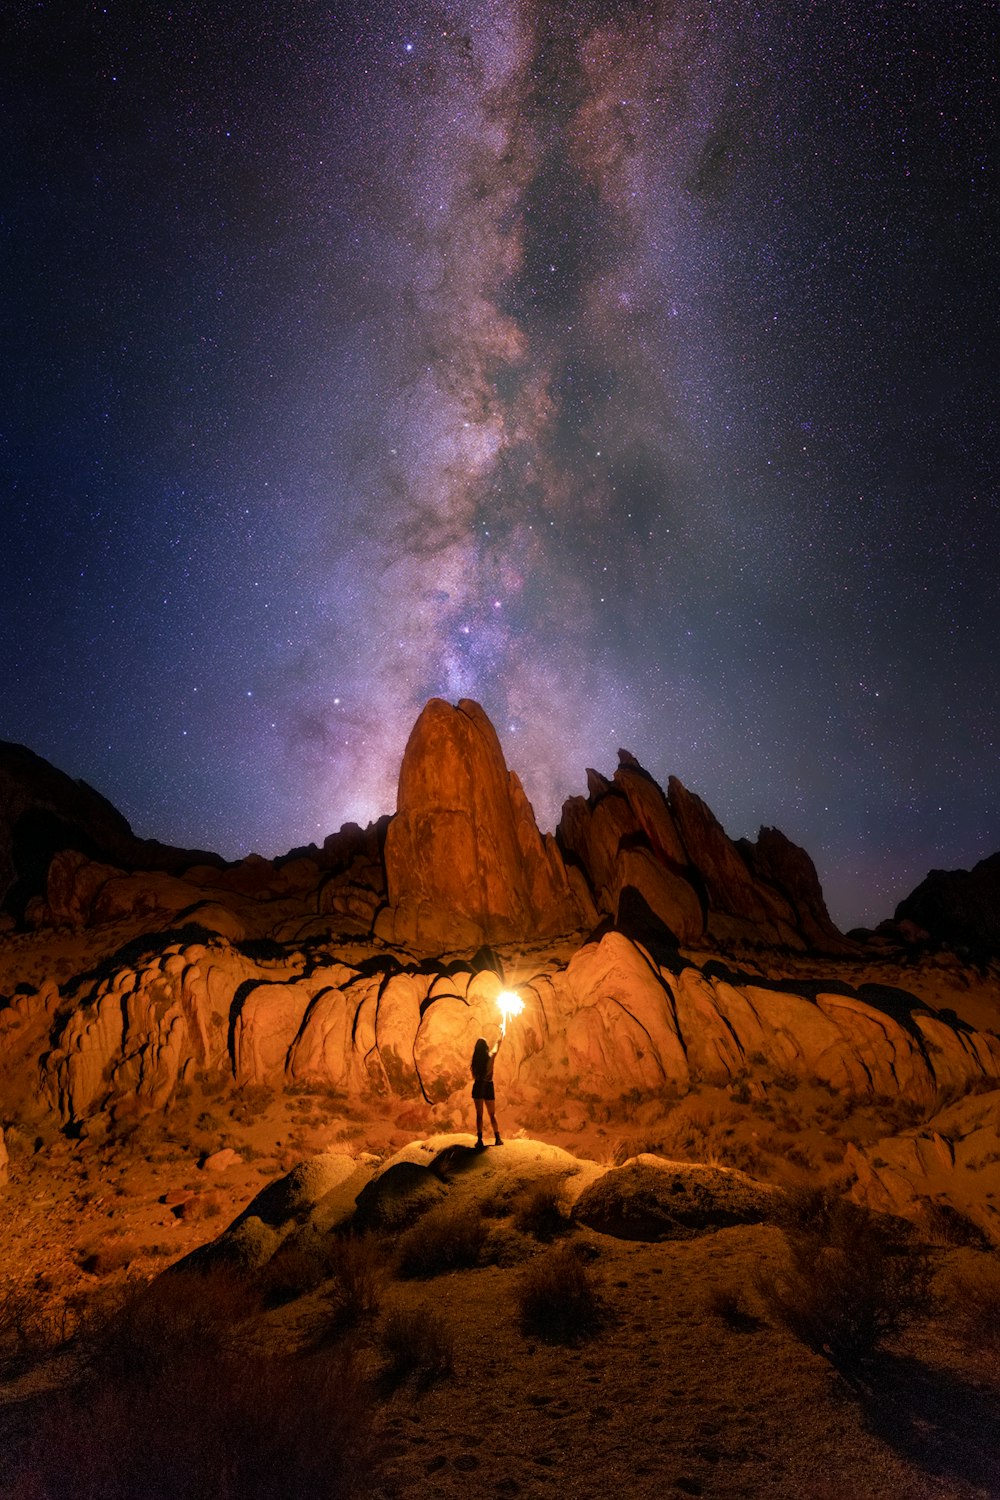 silhouette of person standing on rock formation under starry night